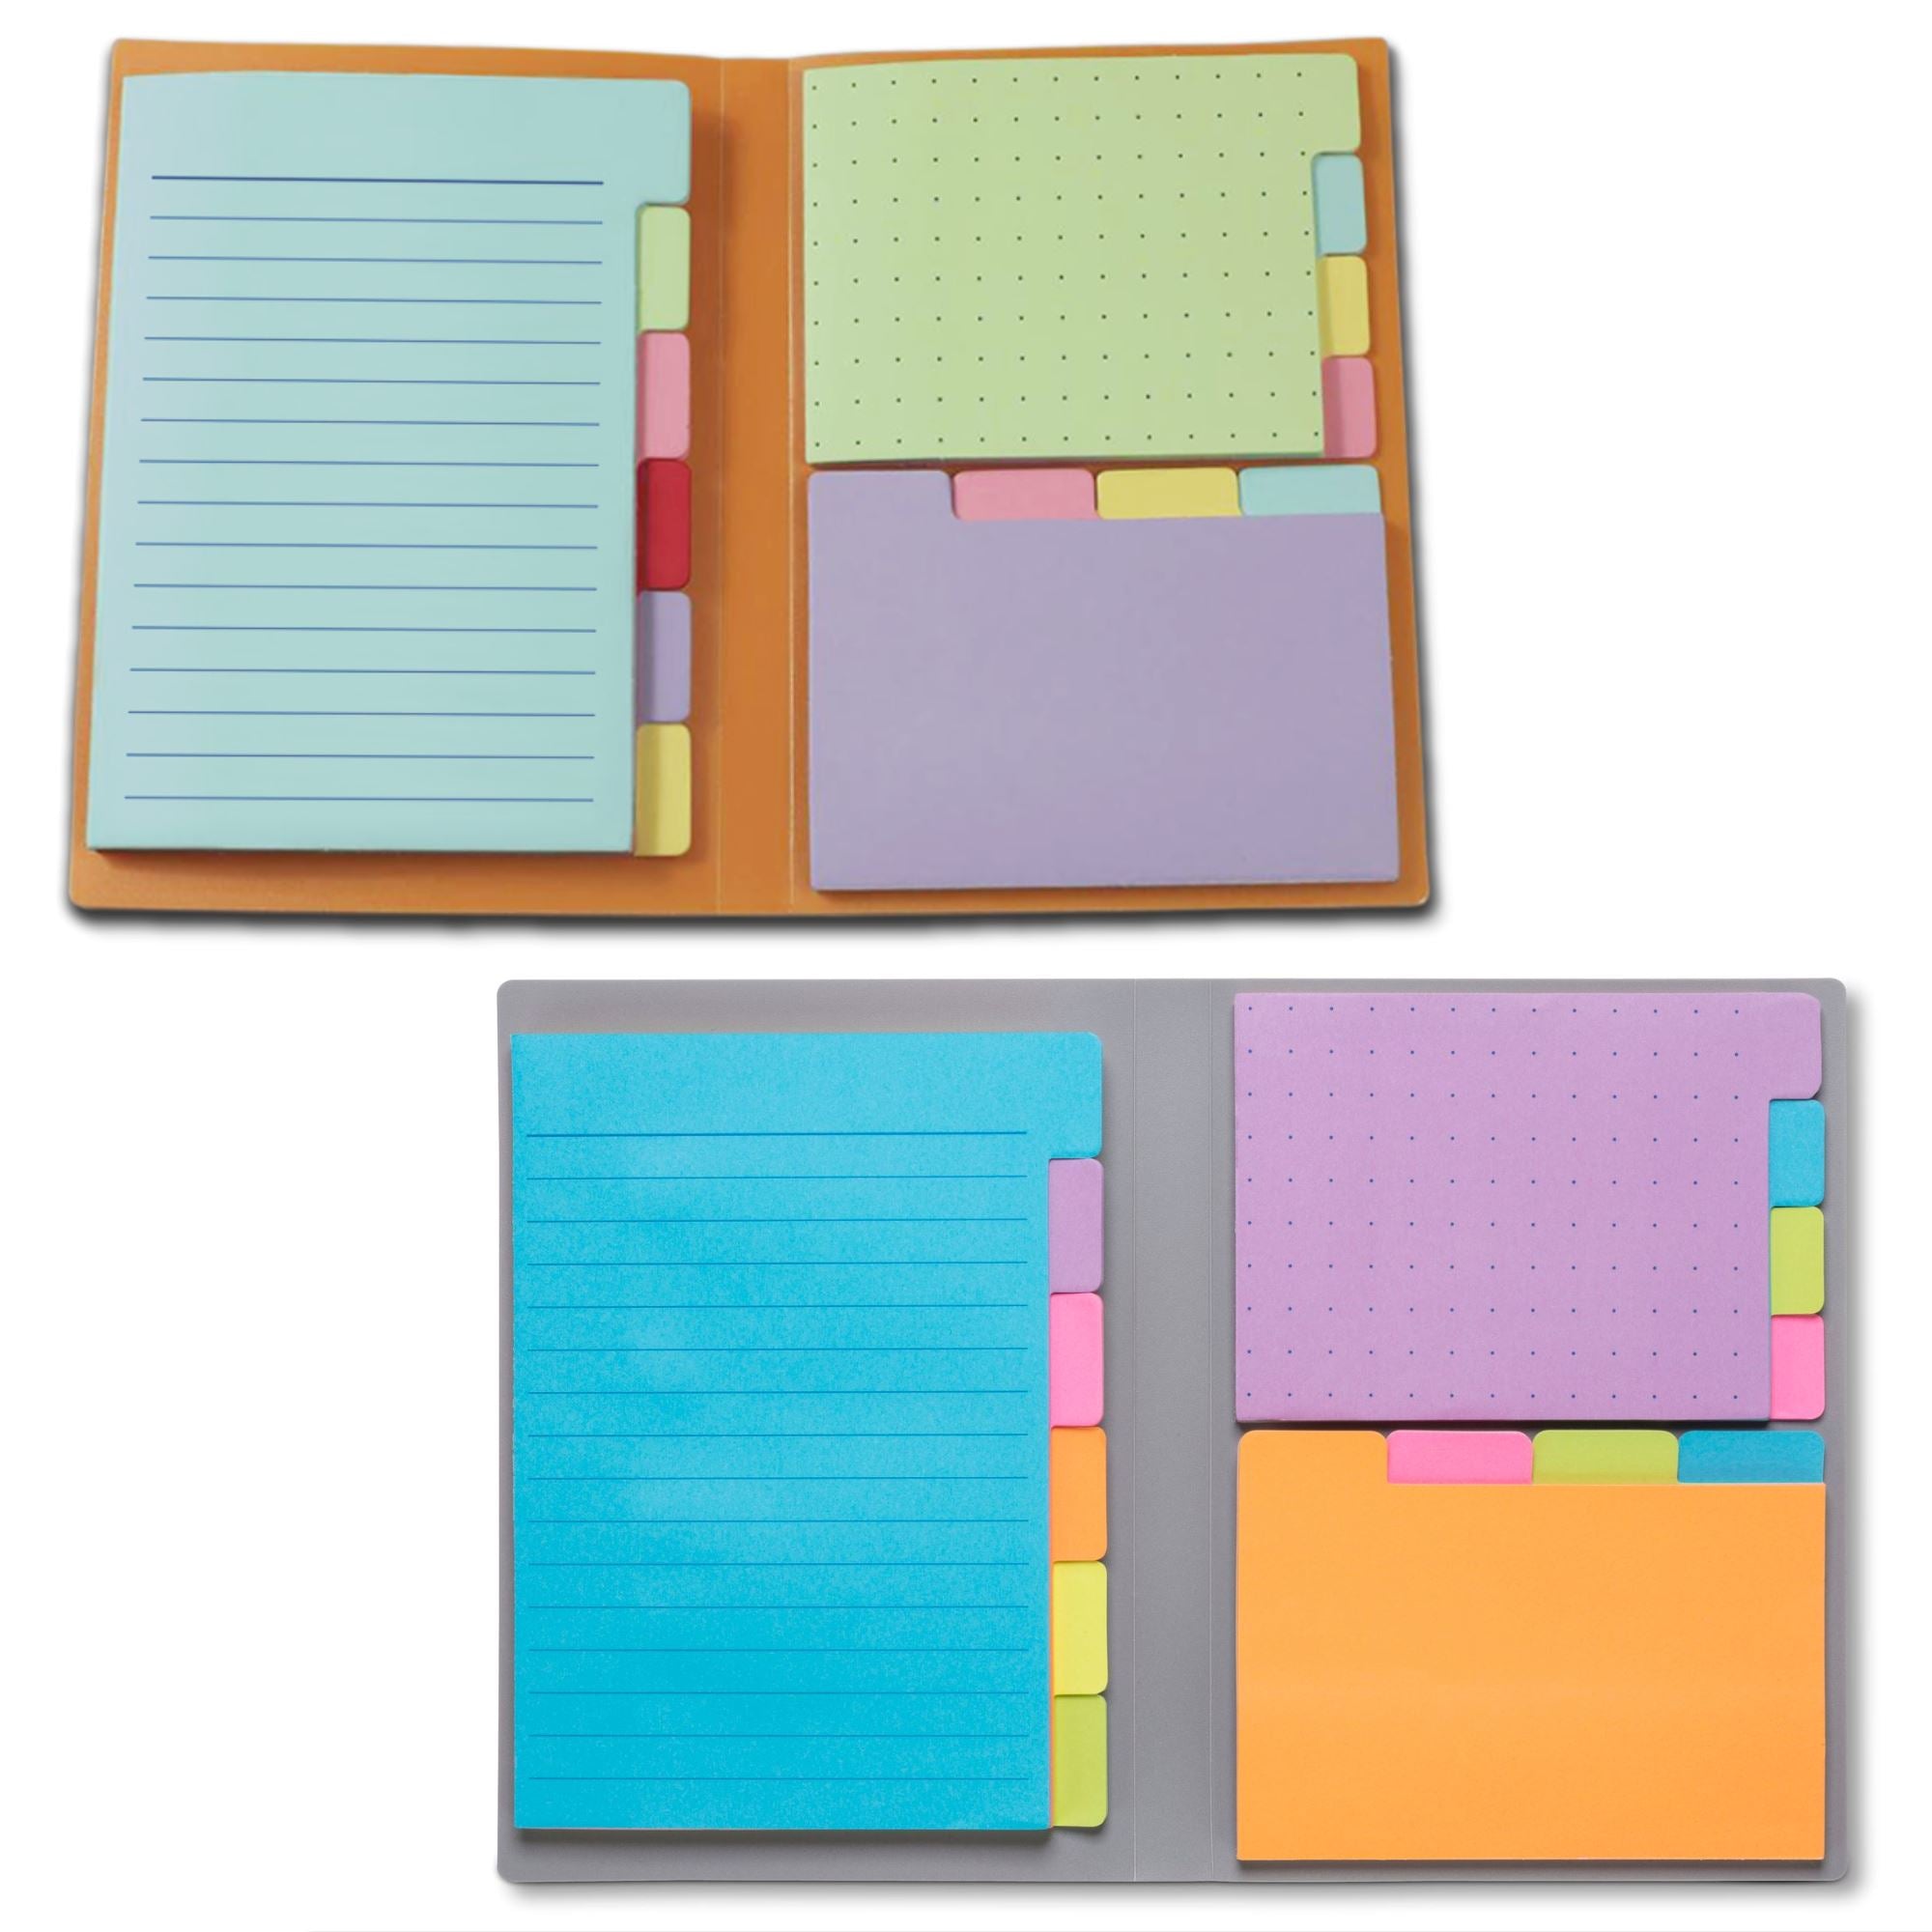 Extend Sticky Notes Lined Grided Dotted Planner Study School Supplies Note  Taking 